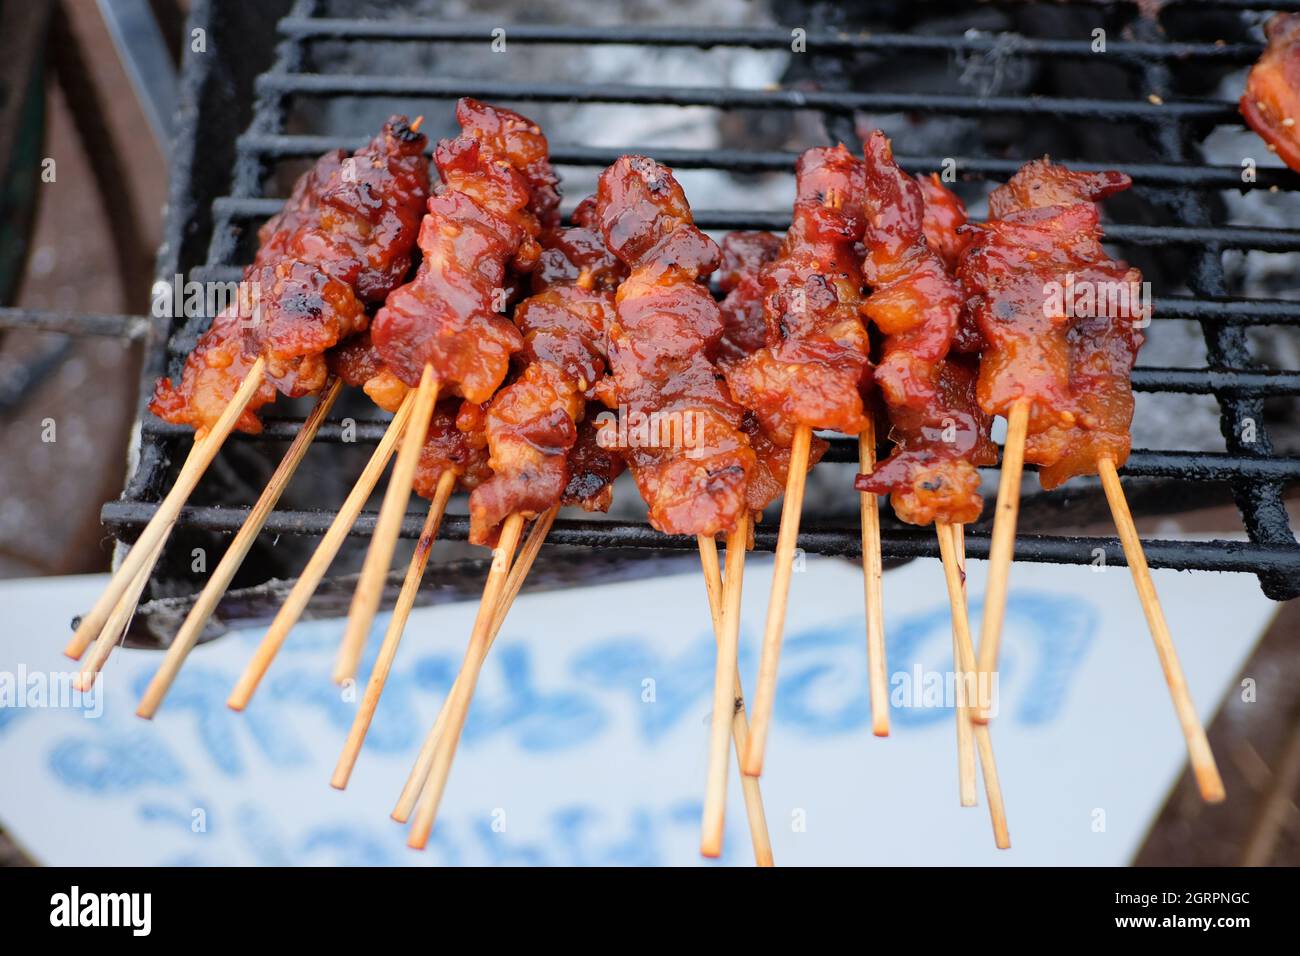 Close-up Of Meat On Barbecue Grill Stock Photo